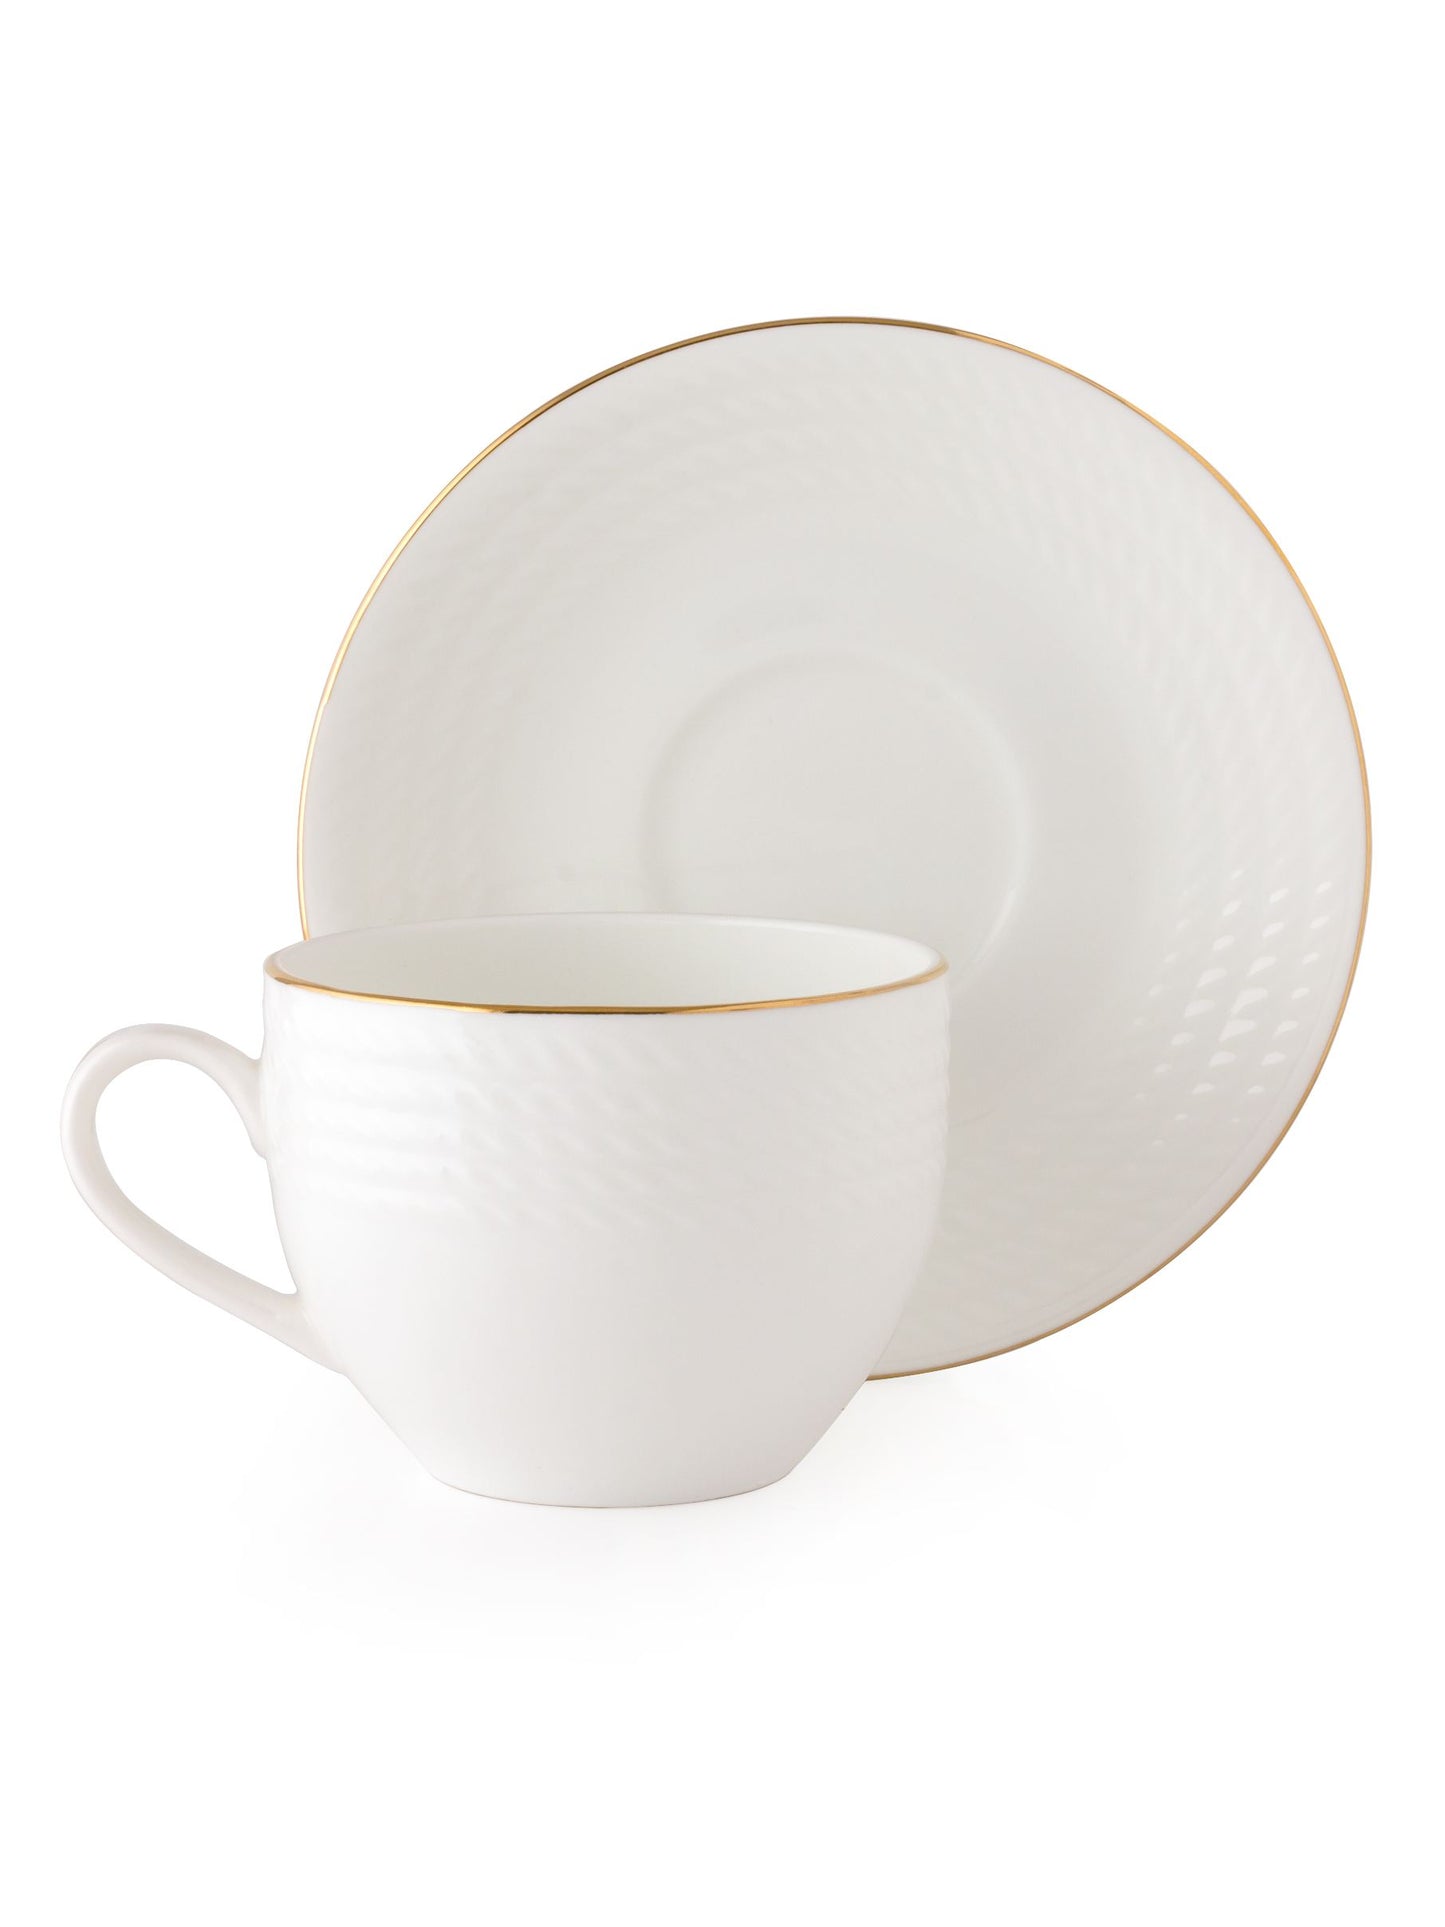 Rope Impression Cup & Saucer, 180ml, Set of 12 (6 Cups + 6 Saucers) (1101)